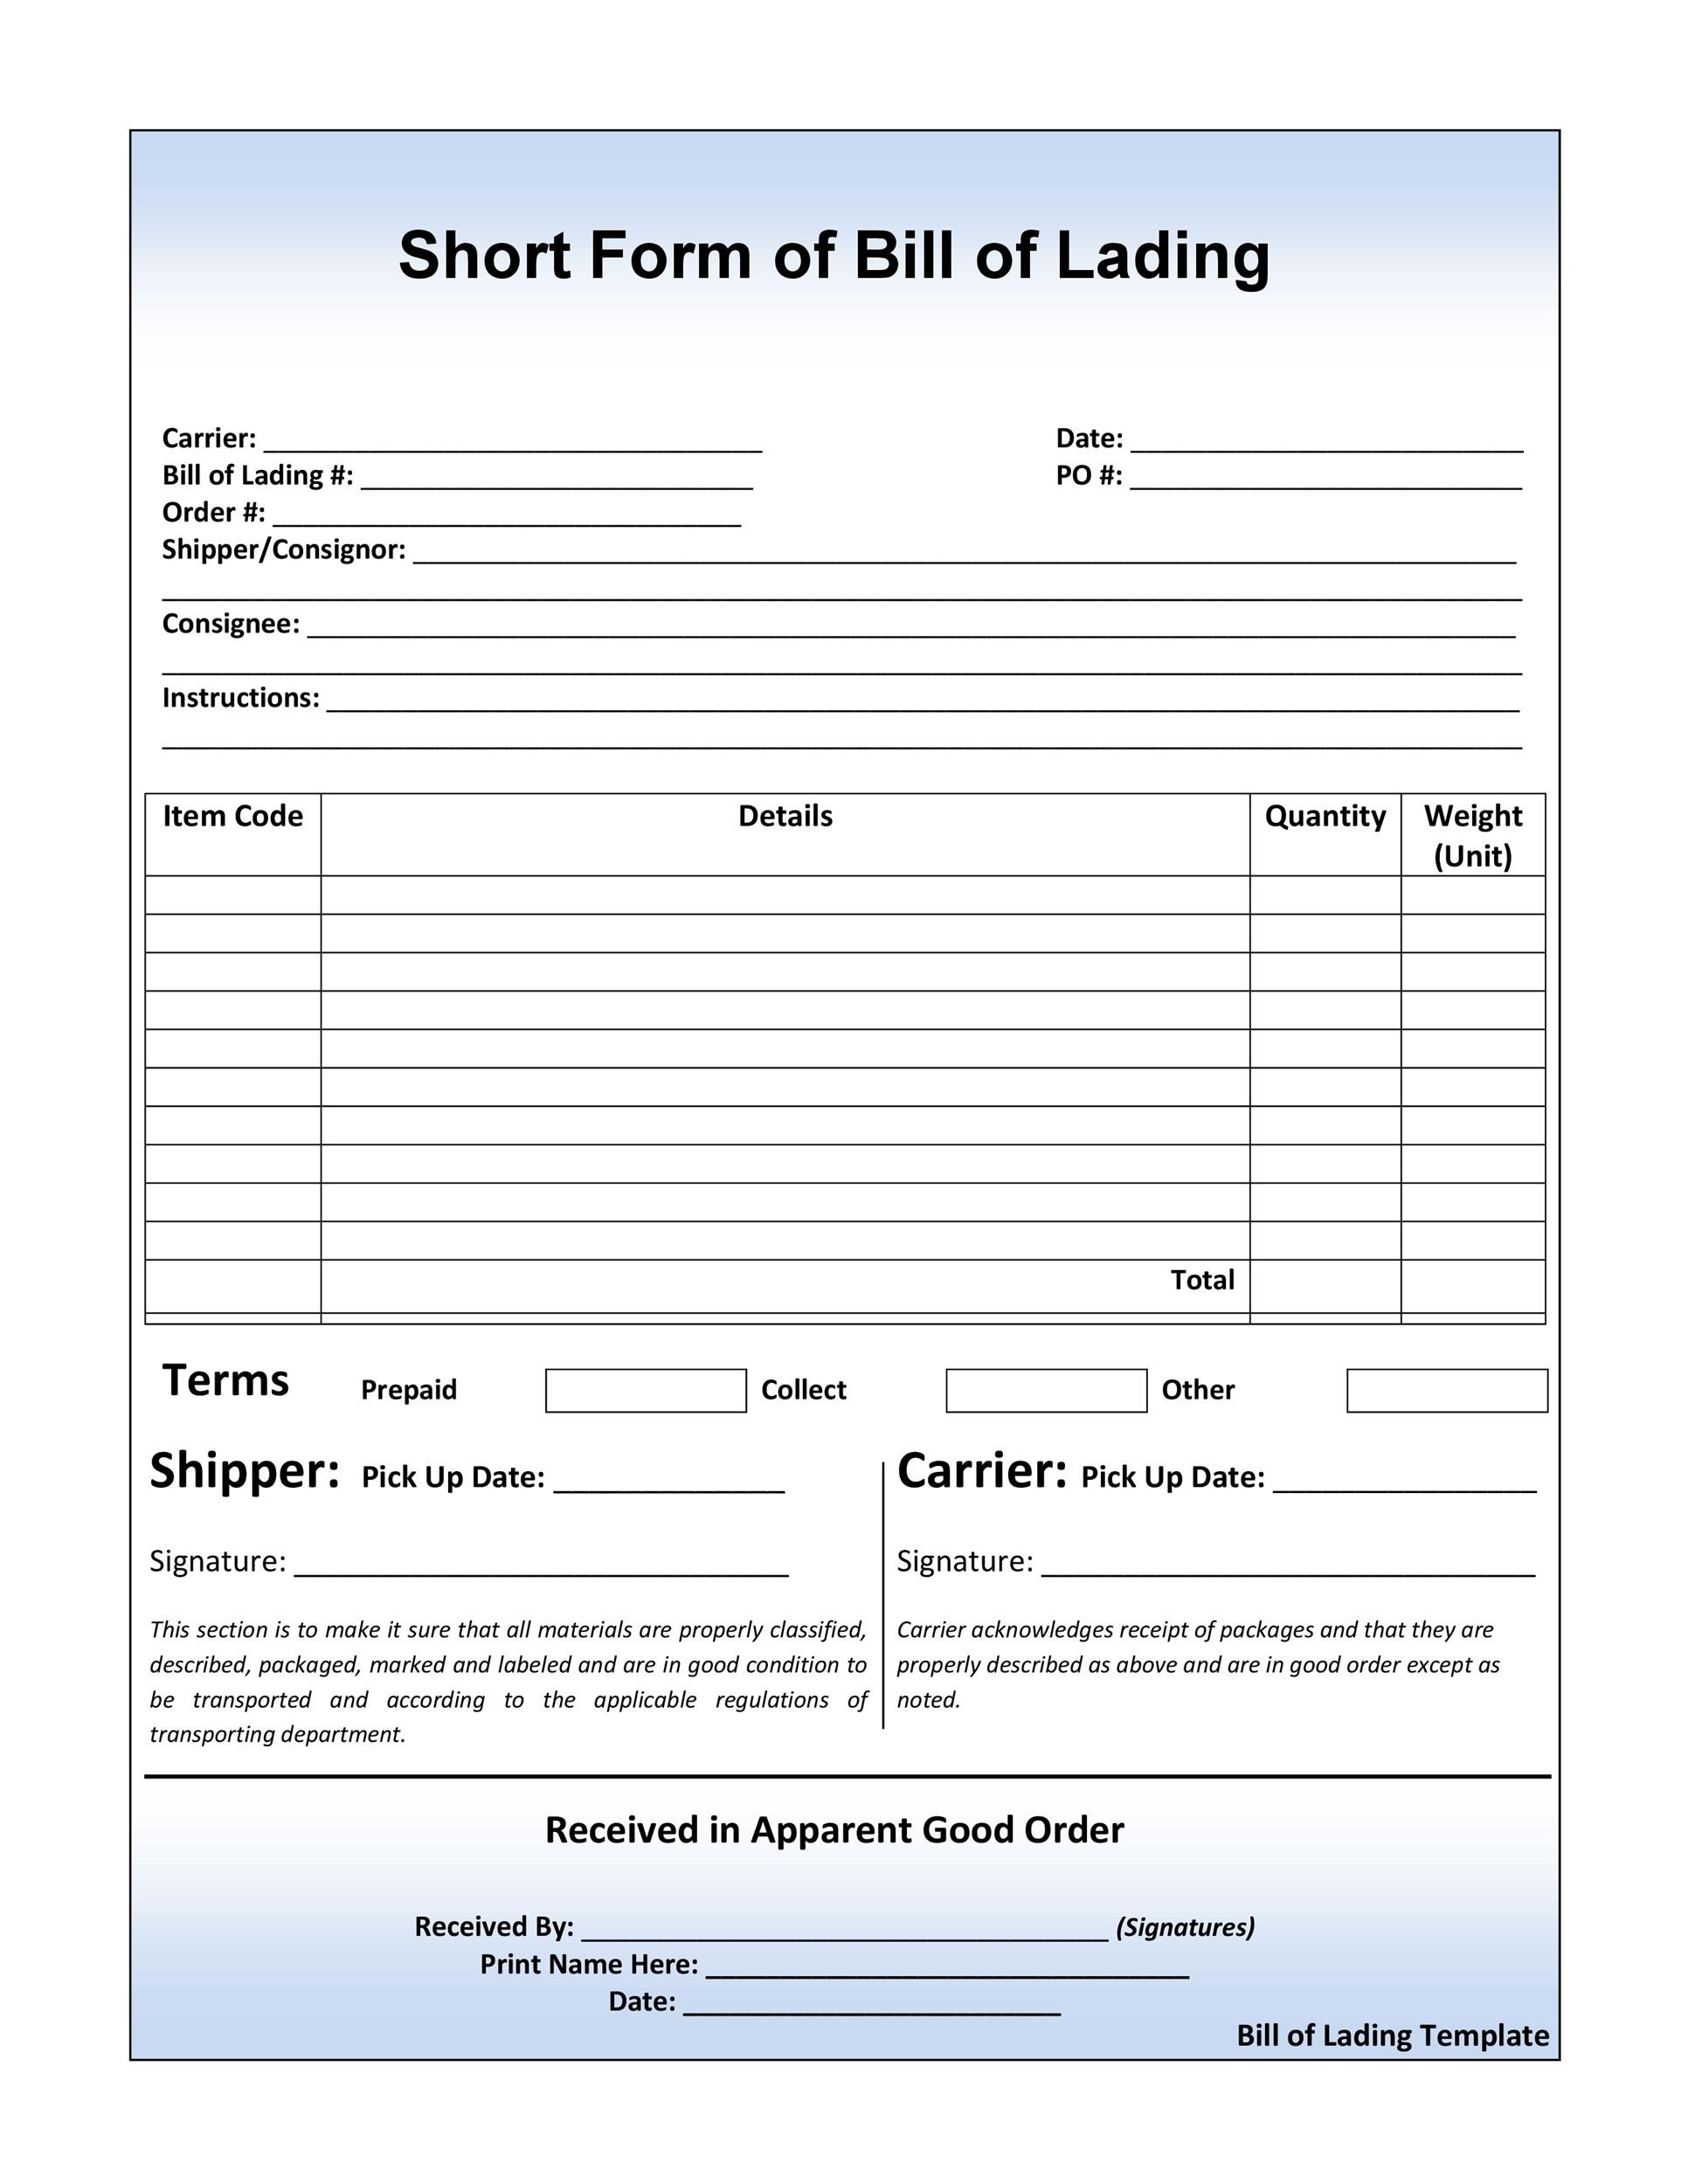 generic-bill-of-lading-template-excel